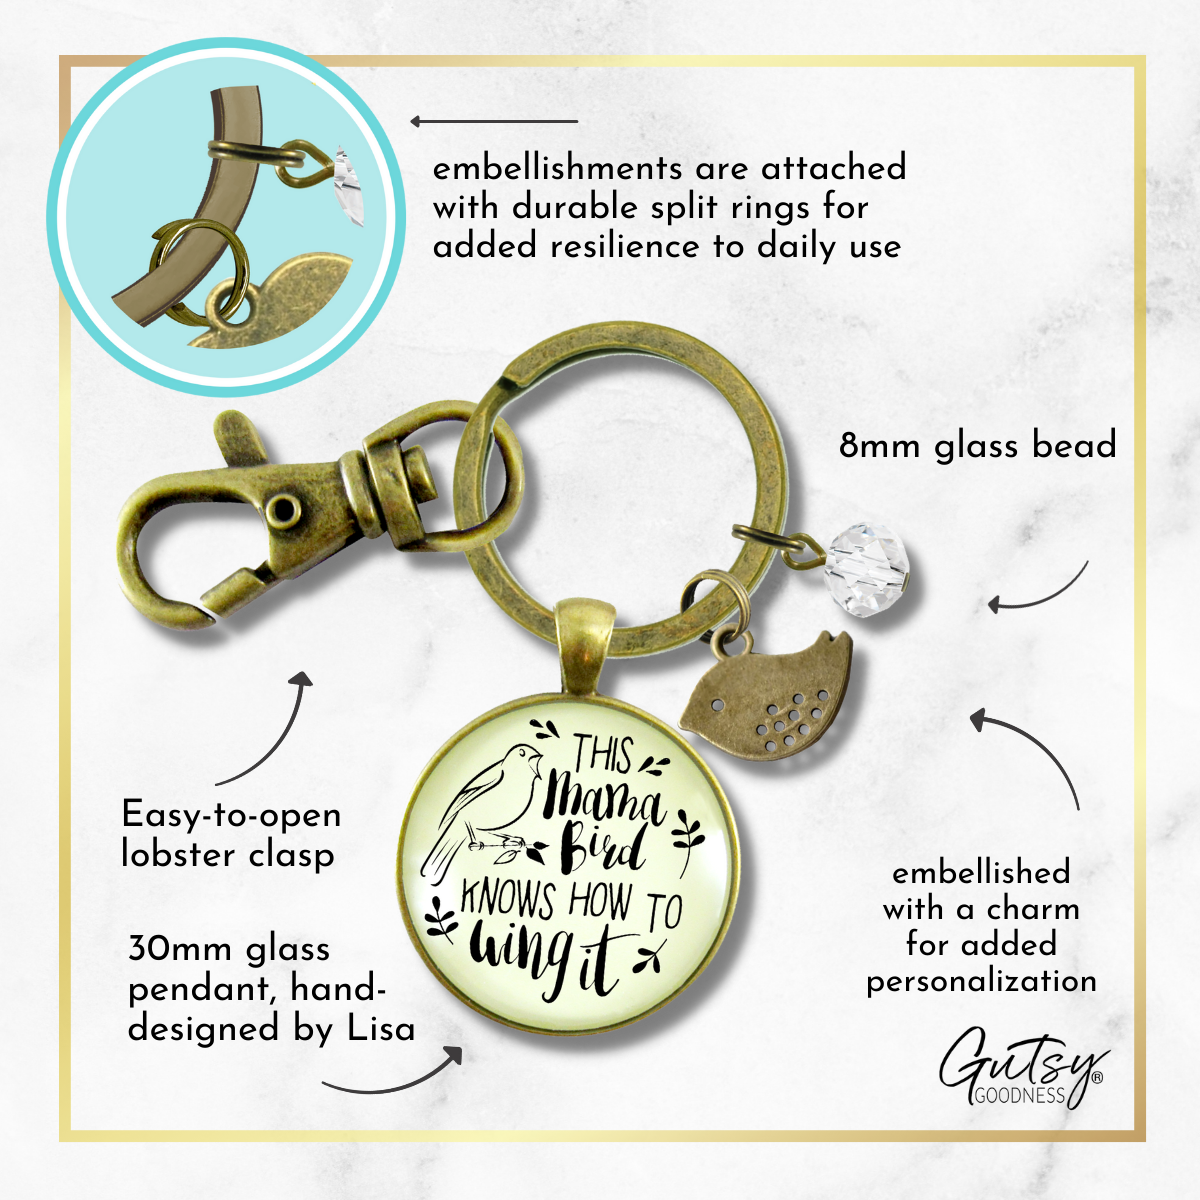 Gutsy Goodness Mama Bird Keychain Mother Wings It Personalize Cute Baby Bird Gift Mom Jewelry For Women - Gutsy Goodness;Mama Bird Keychain Mother Wings It Personalize Cute Baby Bird Gift Mom Jewelry For Women - Gutsy Goodness Handmade Jewelry Gifts